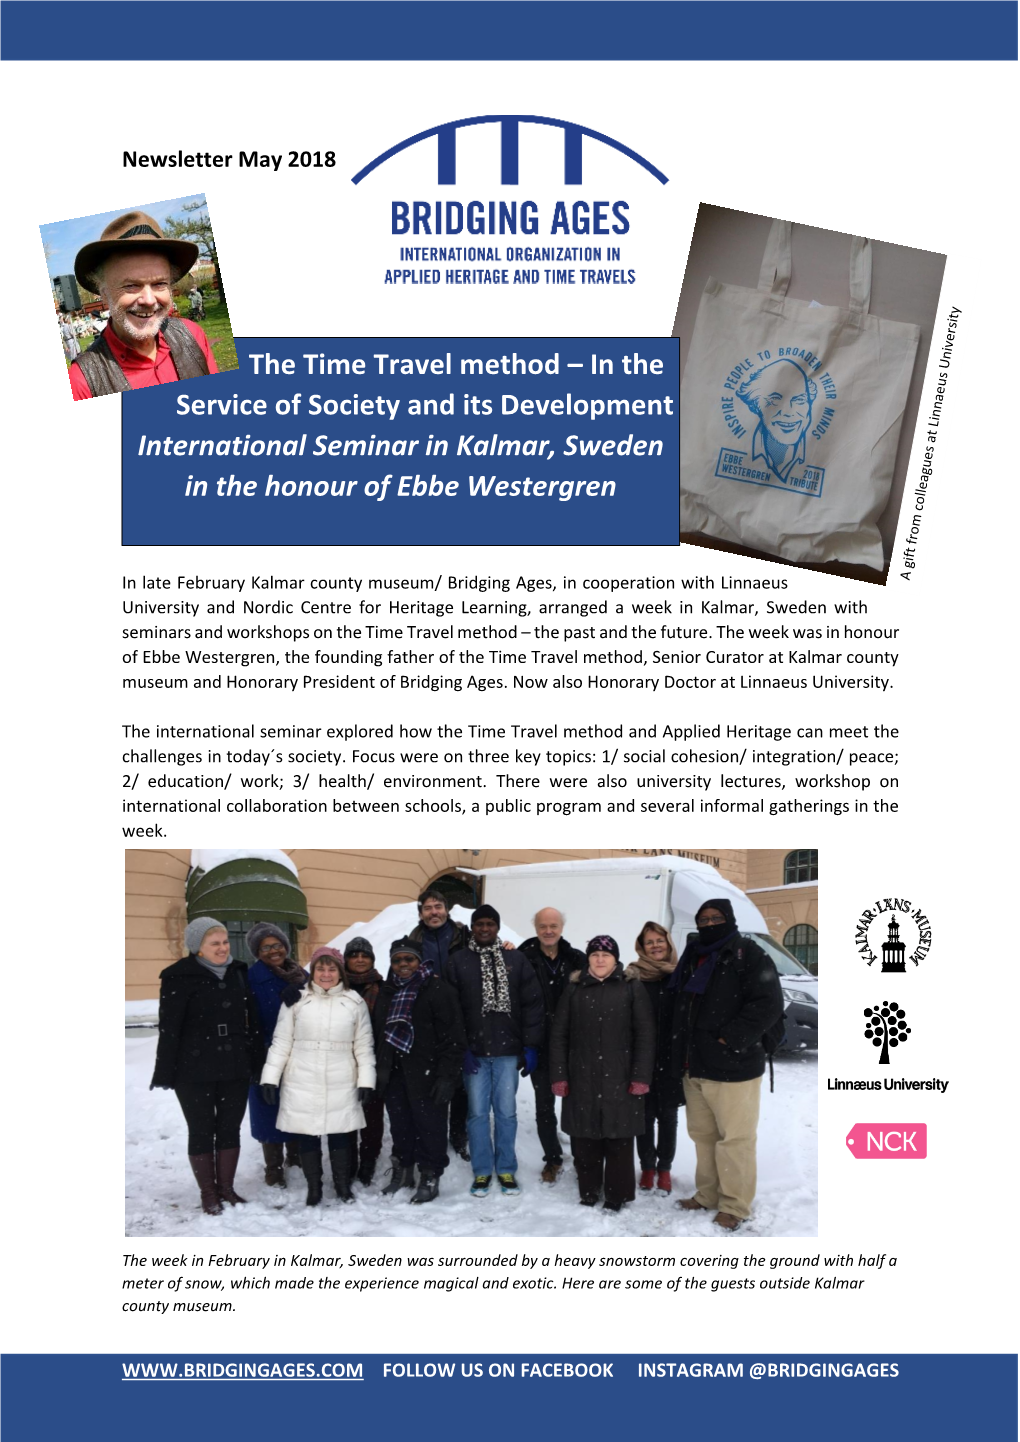 The Time Travel Method – in the Service of Society and Its Development International Seminar in Kalmar, Sweden in the Honour of Ebbe Westergren